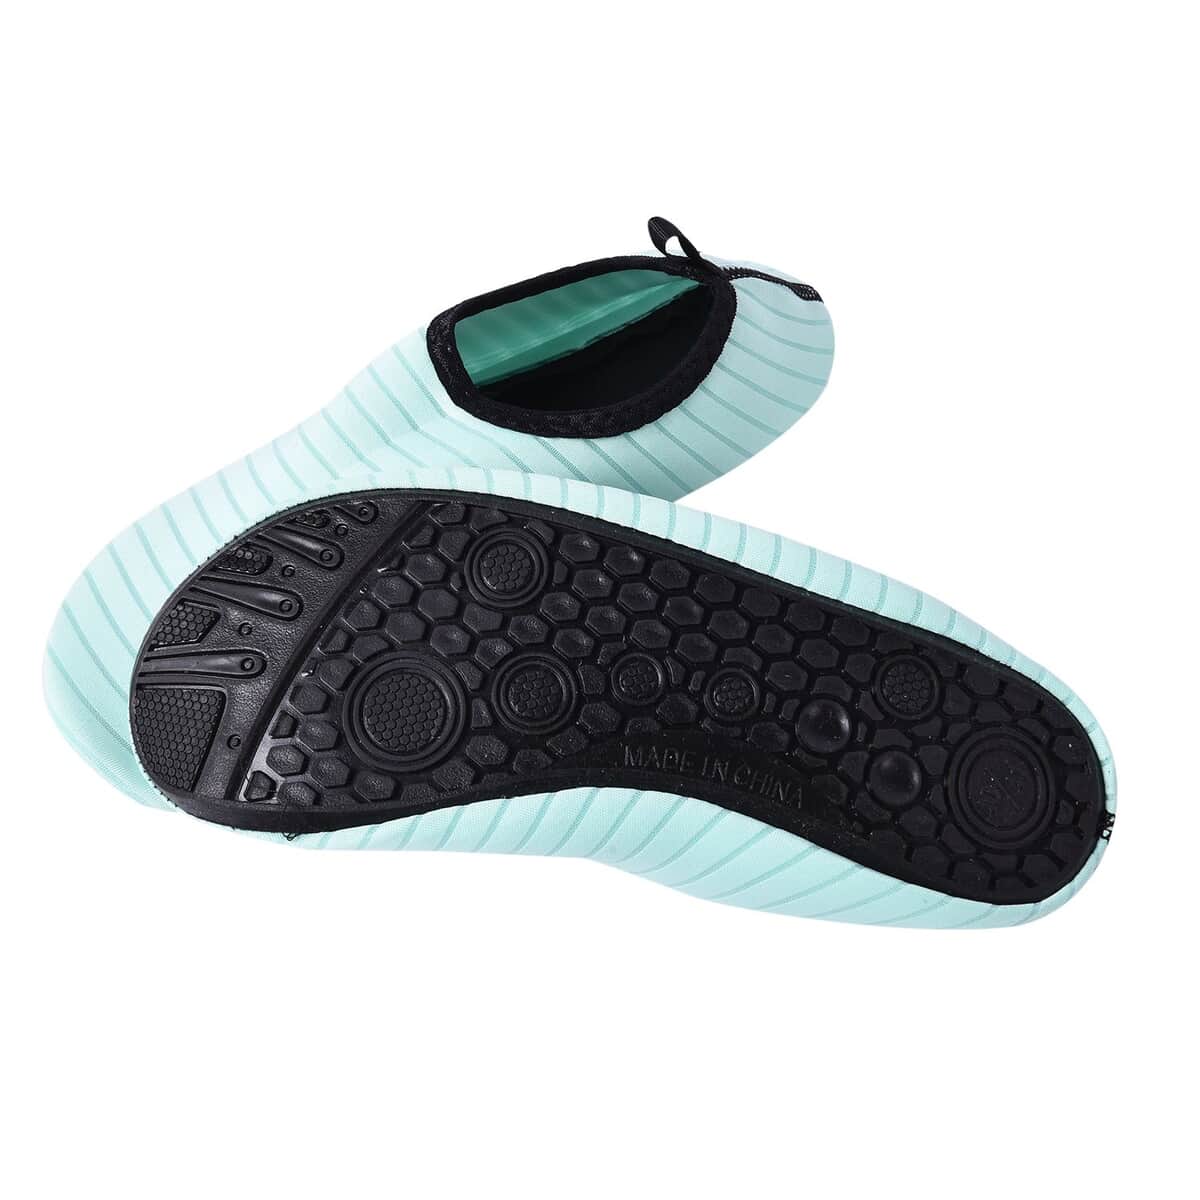 Green Mint Women's and Men's Water Shoes Barefoot Quick-Dry Aqua Socks (Size 7.5-8.5) image number 2